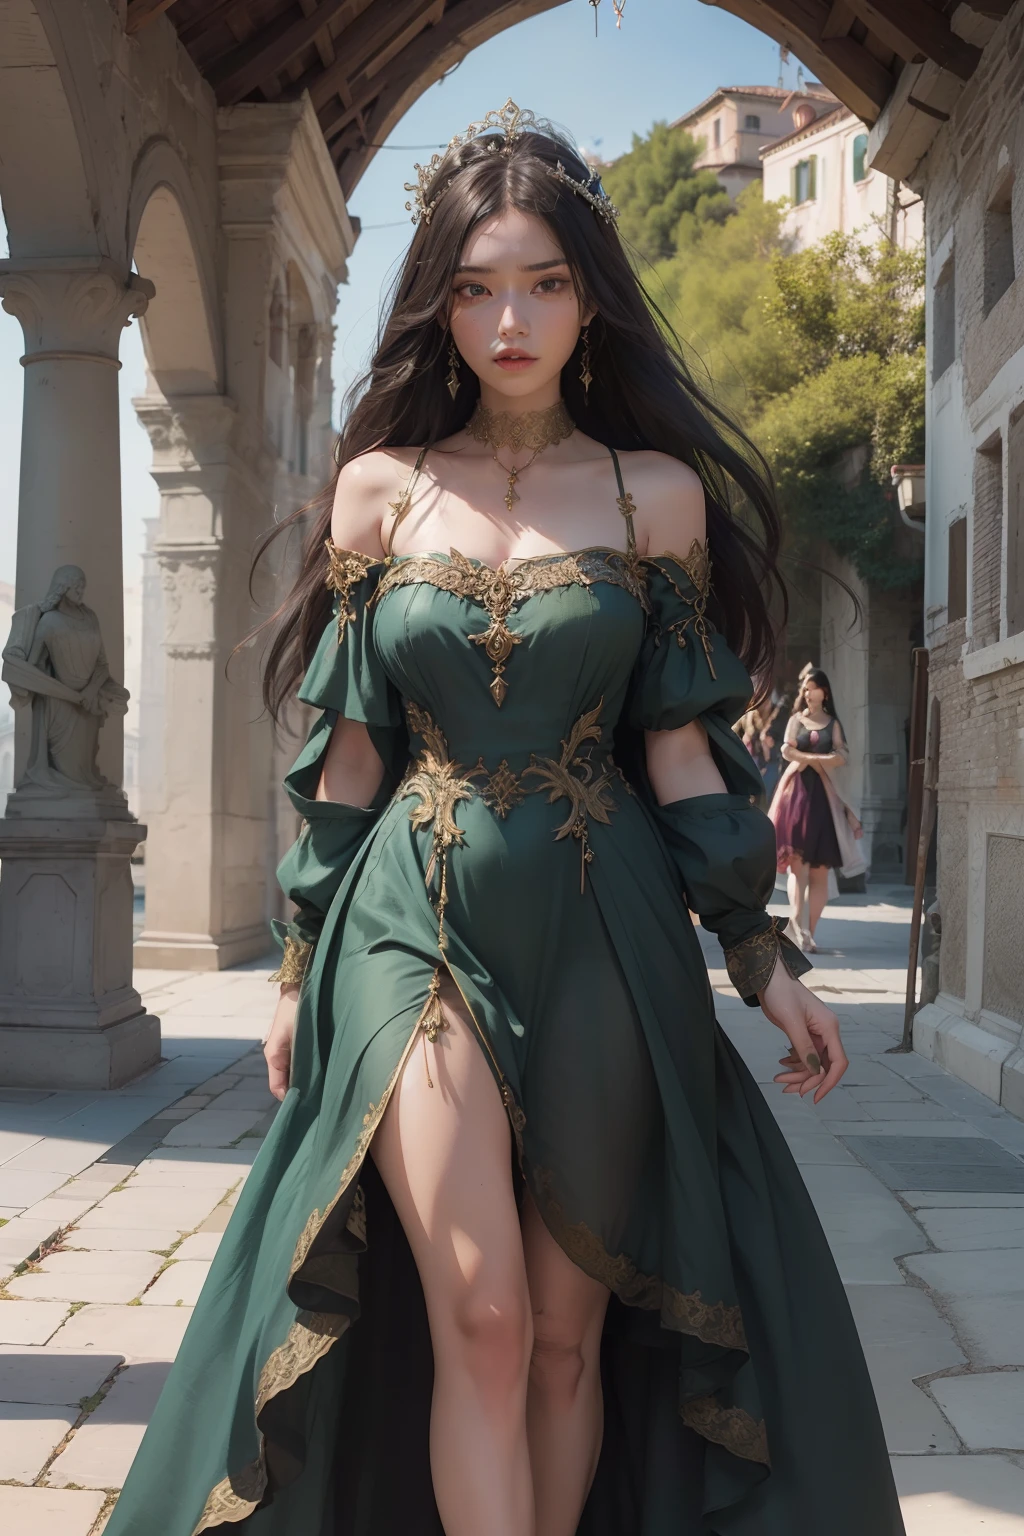 top quality picture　　　、Italy、Venice　、old bridge　、
１５century　、(((Long dress with a very luxurious scent)))　、　is standing　　、(((two womens)))　　,　full body Esbian
　 　、Collar with rope　　、(((distressed look)))　、Thin ropes that bind the body　、chains　、Pale green walls　、 Black hair　、low angles　、short-hair　、 shining beautiful skin , Sweat, collar and chain accessories, beautiful black pupil and hair, Detailed expression　, beautidful eyes,